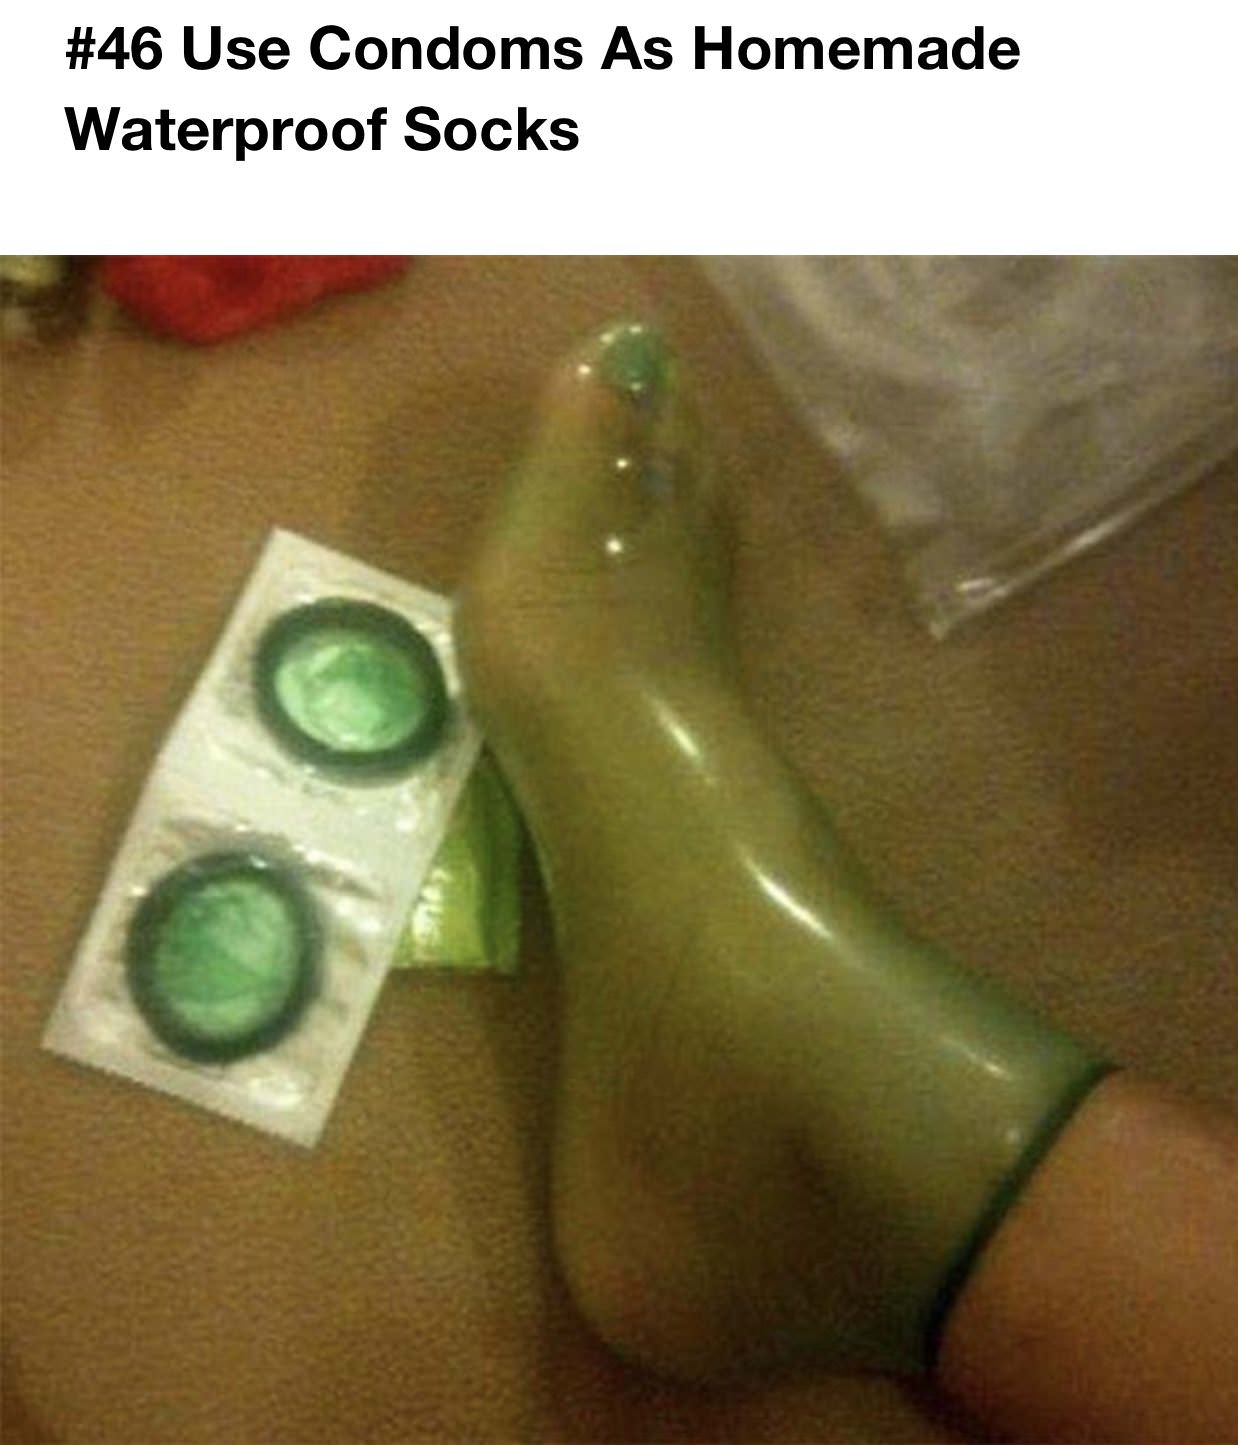 funny pictures that make no sense - Use Condoms As Homemade Waterproof Socks